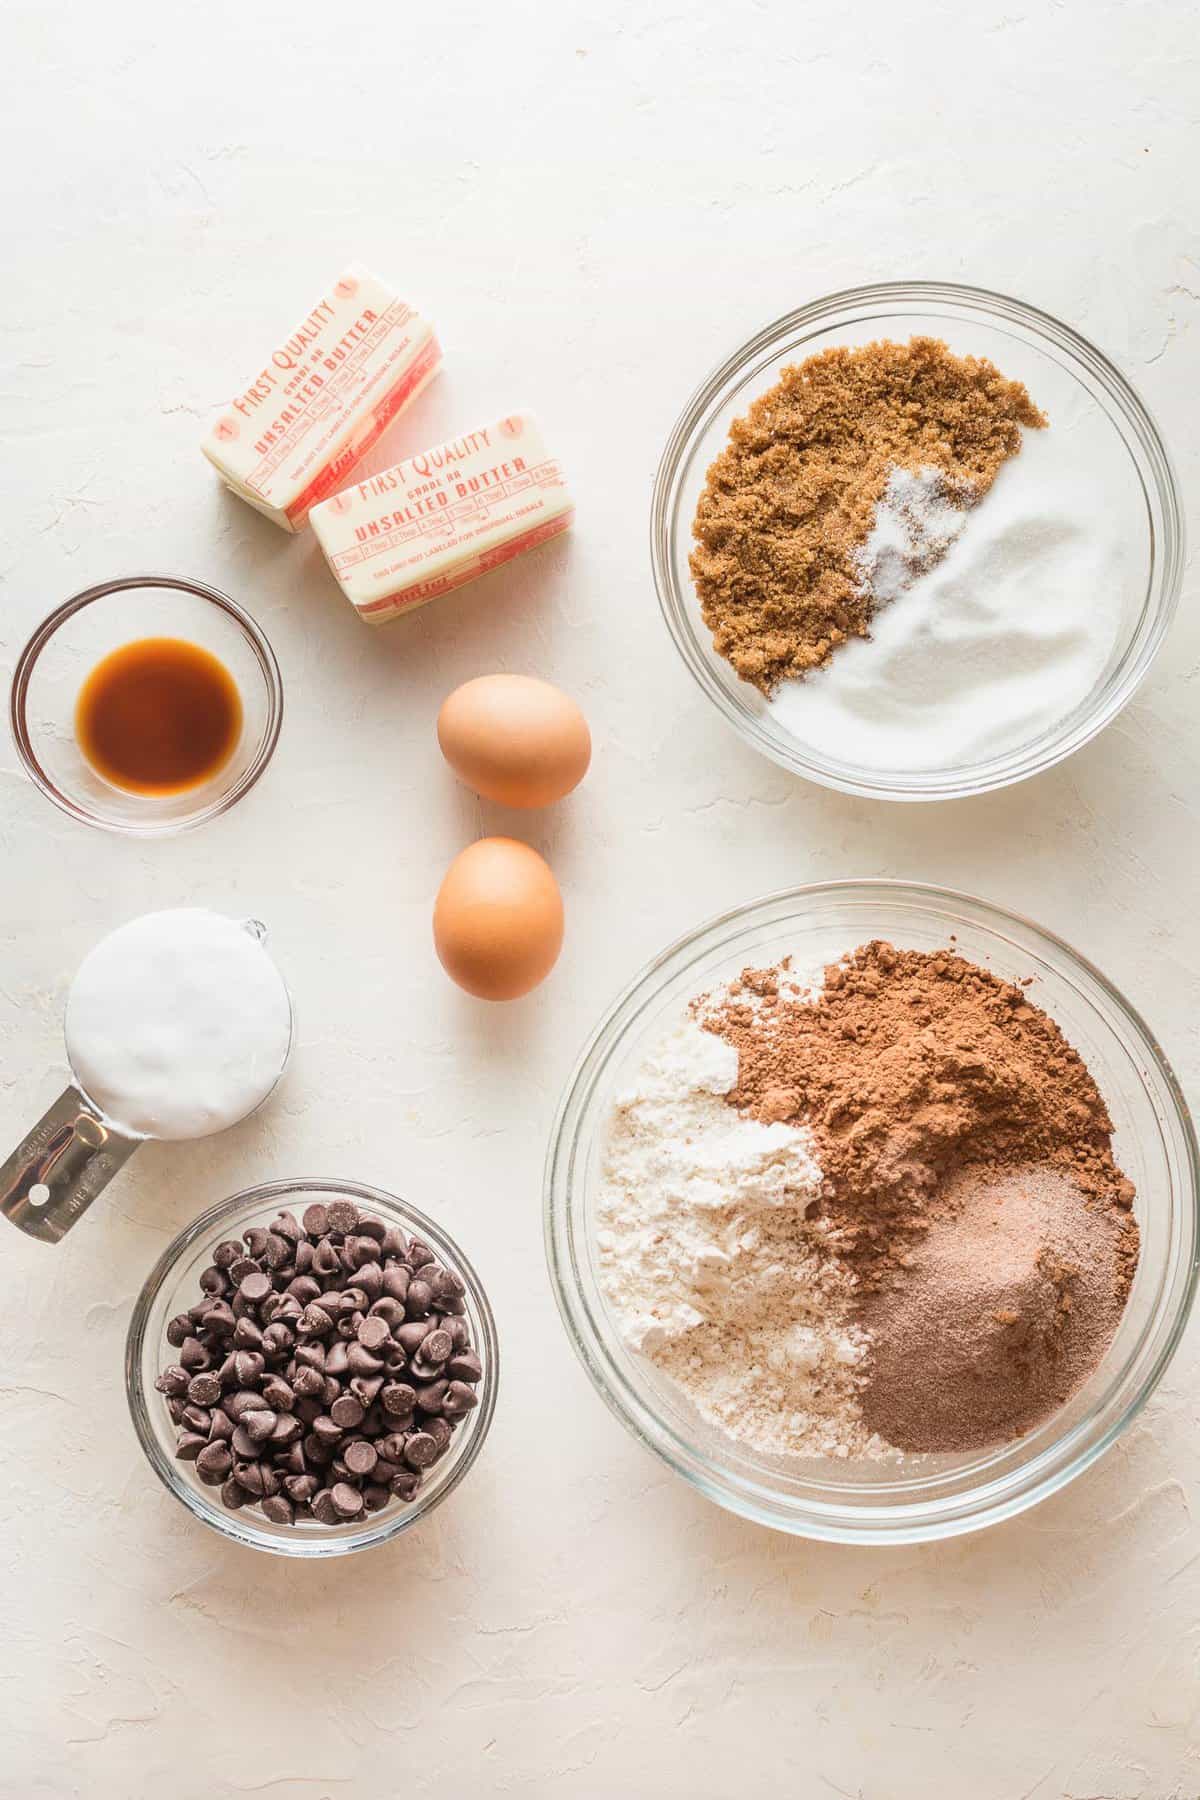 Ingredients to make hot chocolate cookies in small bowls on a counter.